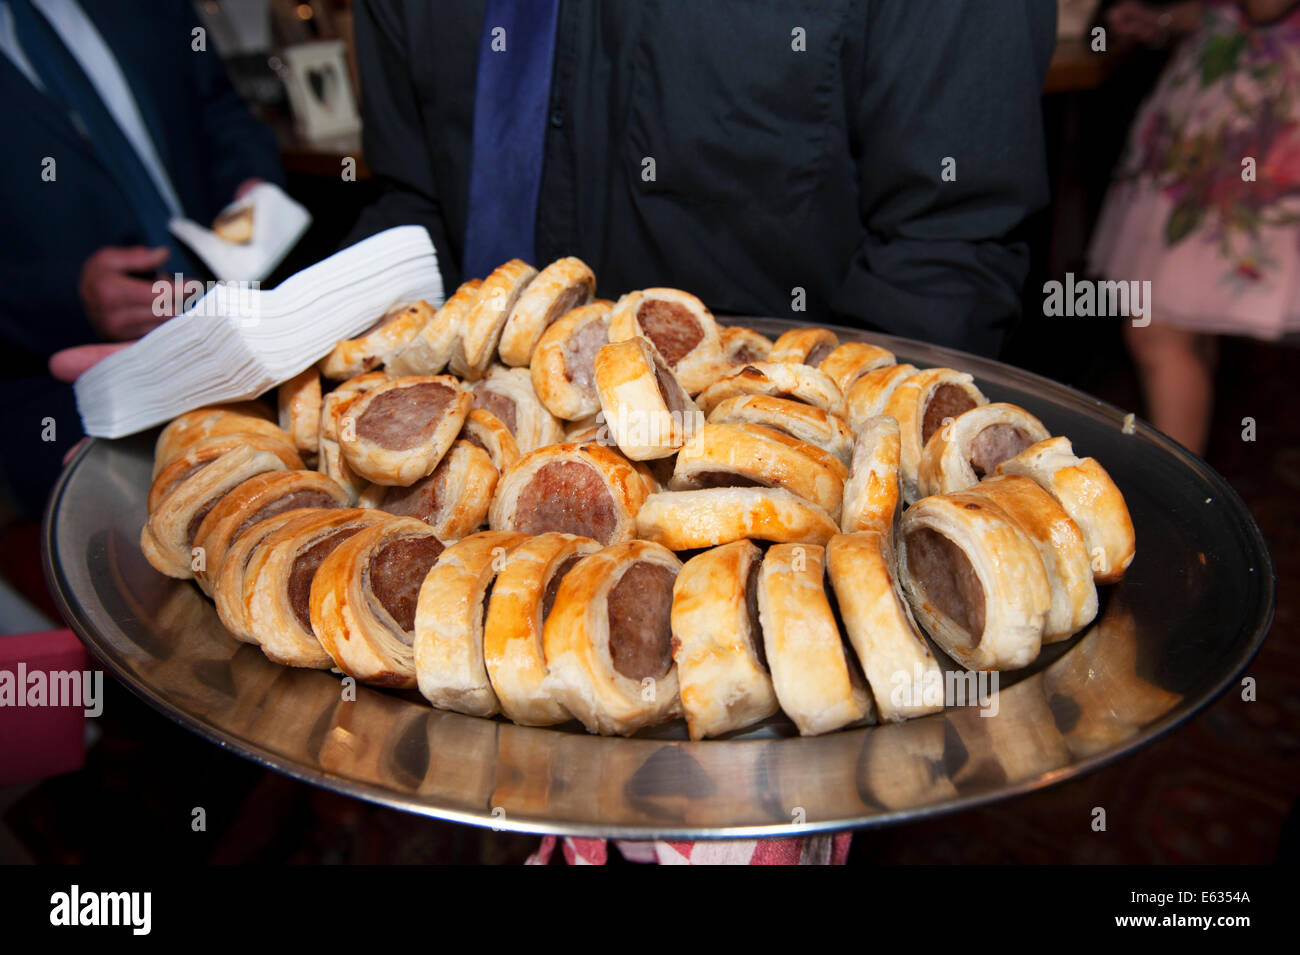 Platter of sausage rolls at a buffet party UK Stock Photo